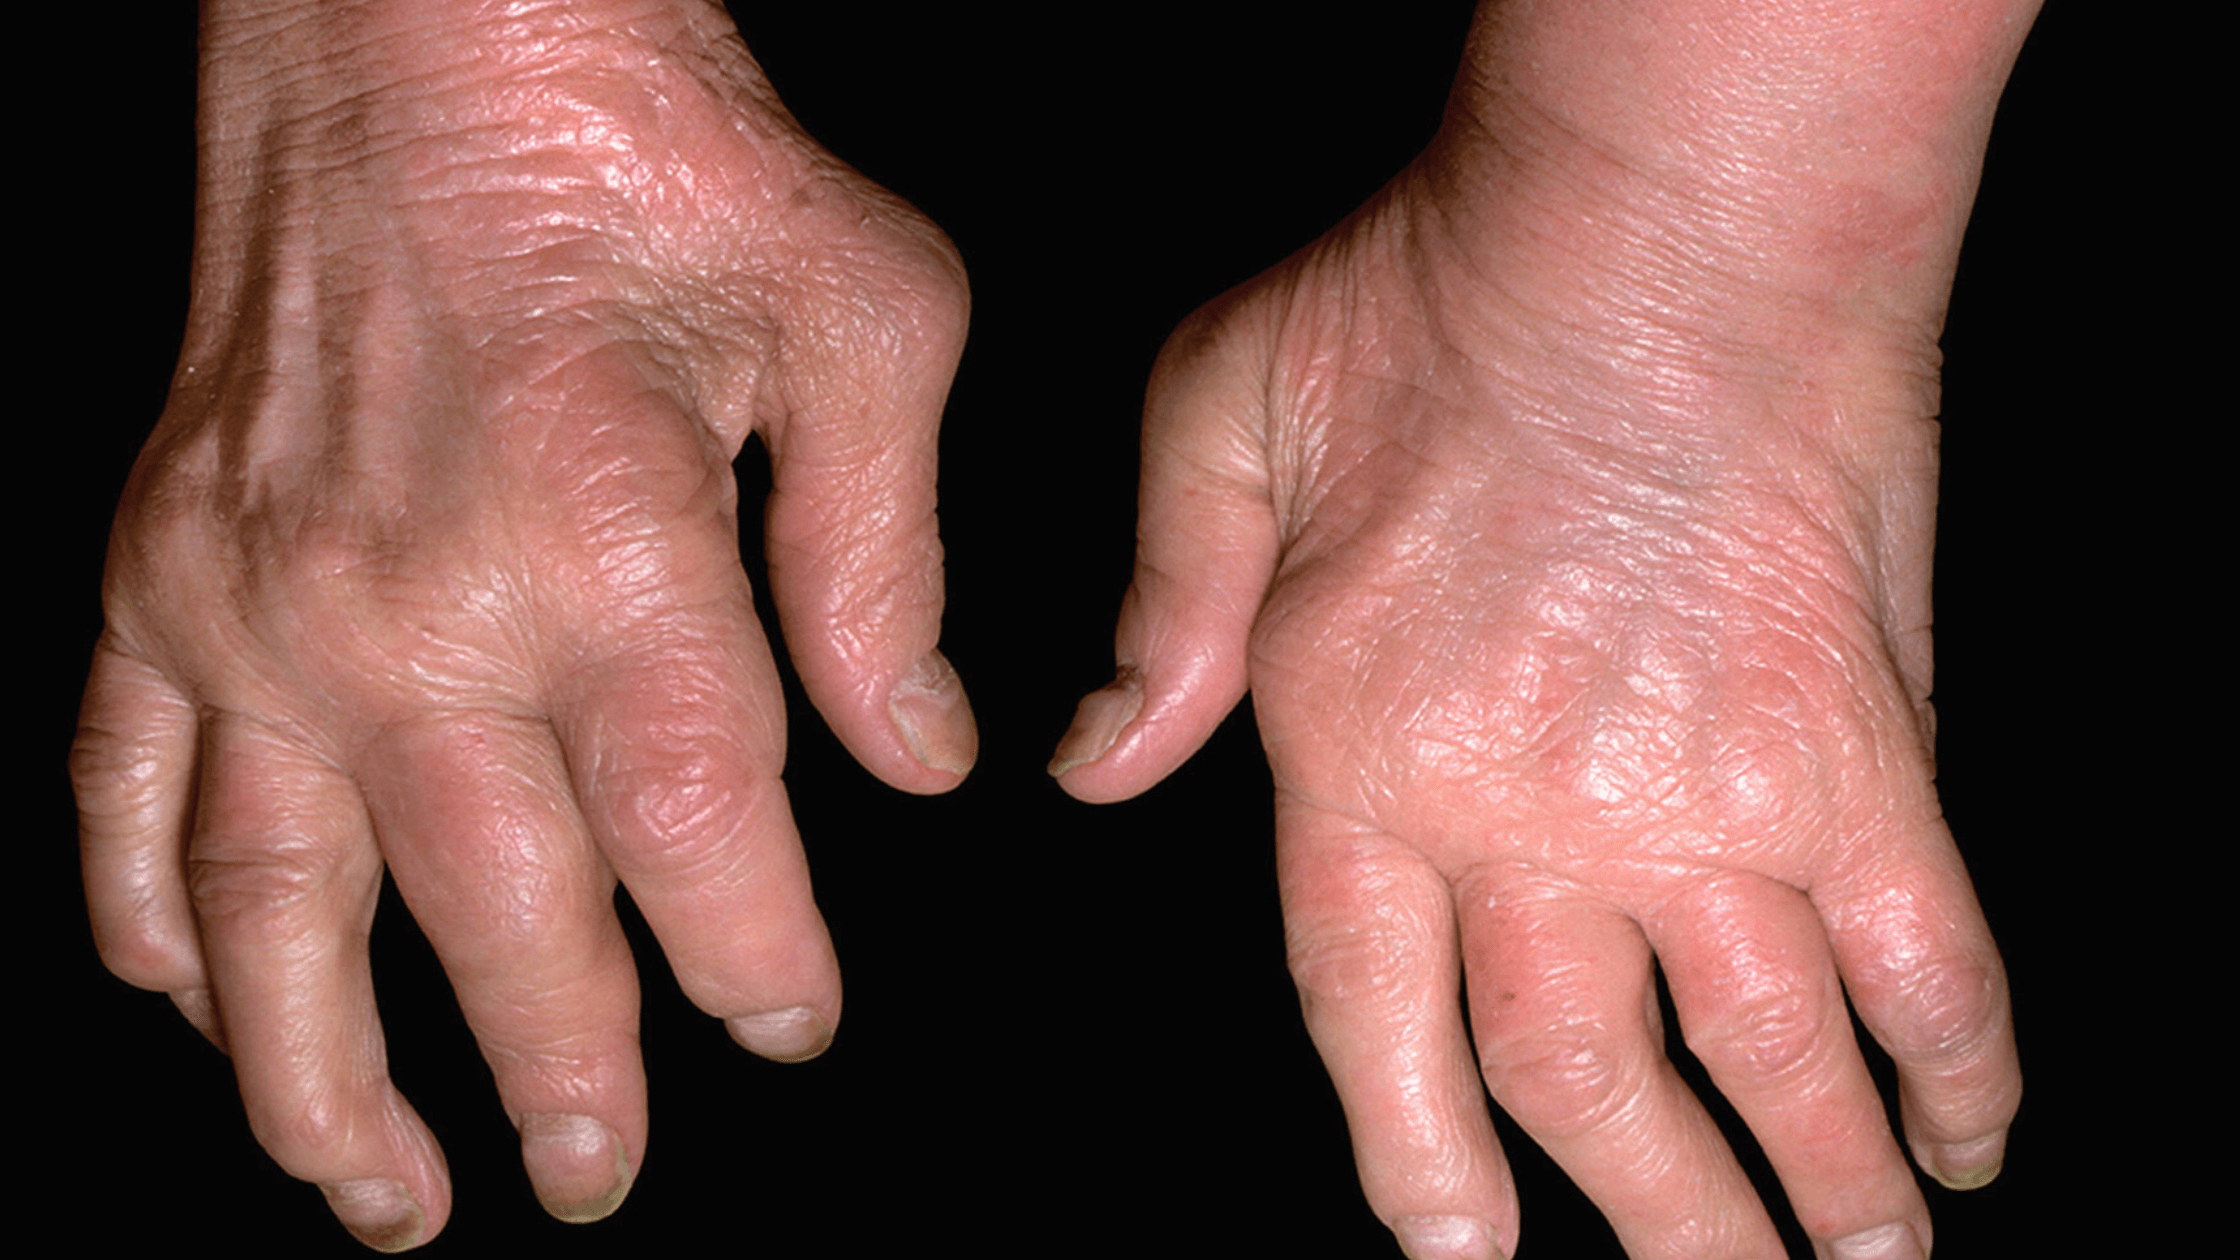 Psoriatic Arthritis Treatments Are Not Getting Better Results